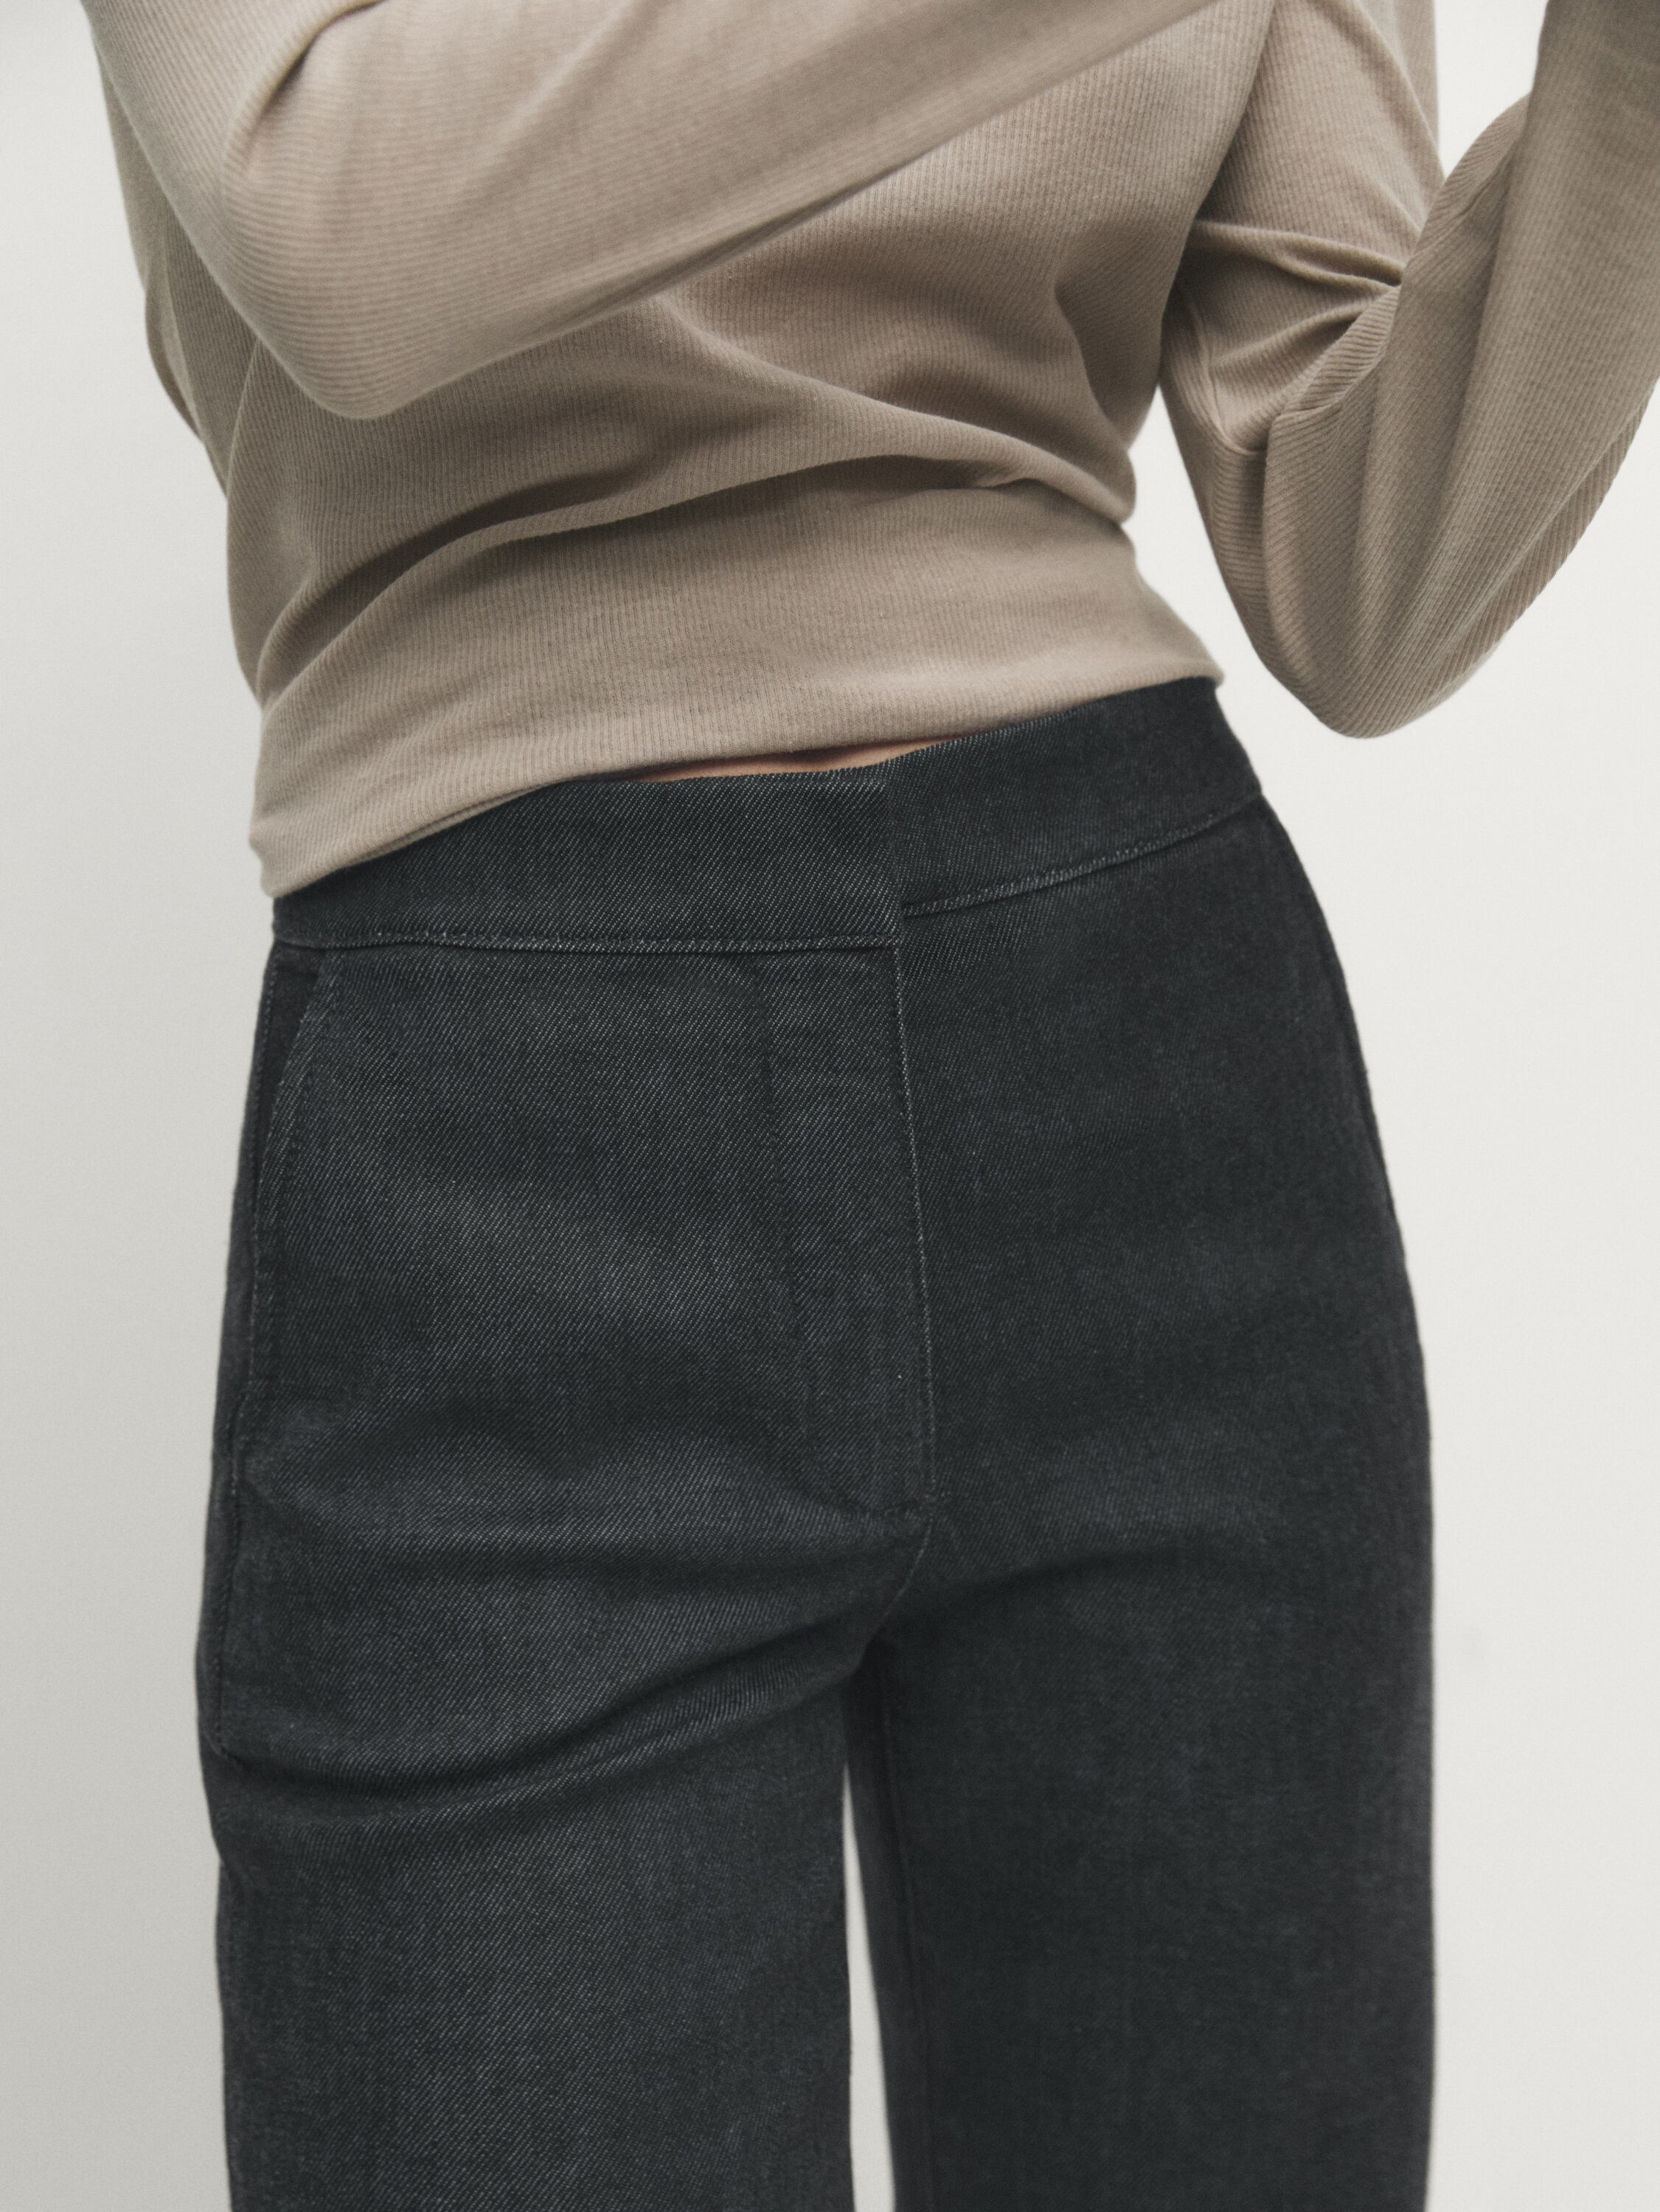 High-waist flared fit jeans with turn-up hems